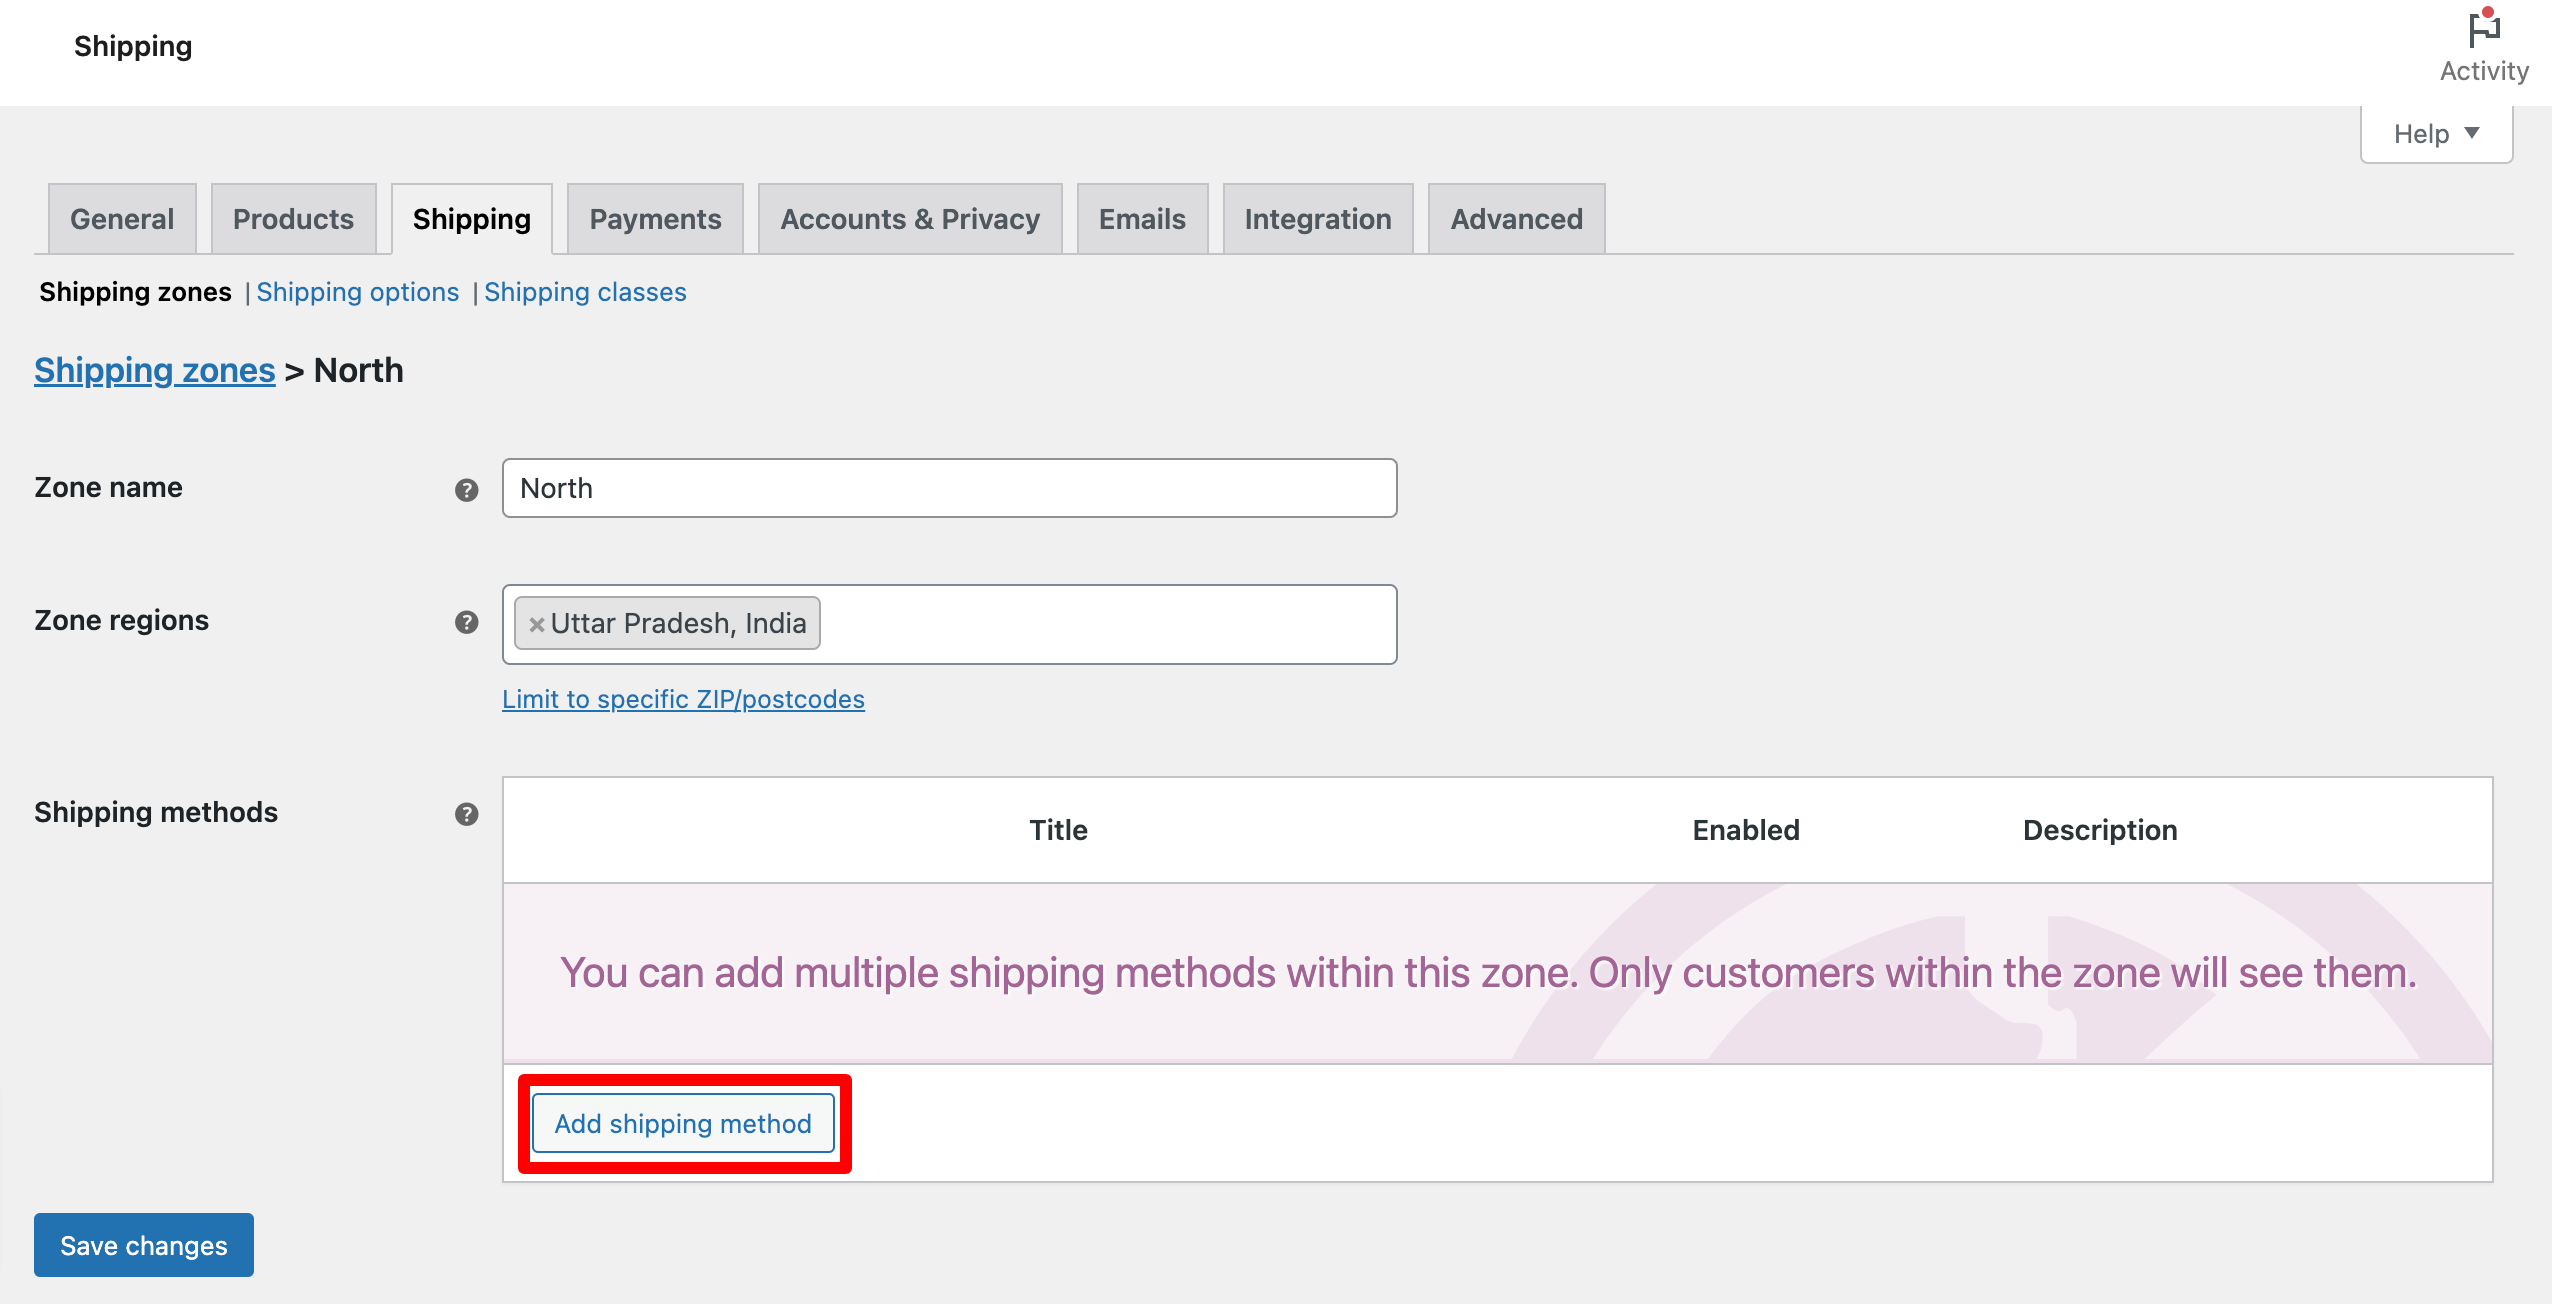 WooCommerce: Add Shipping Method Button